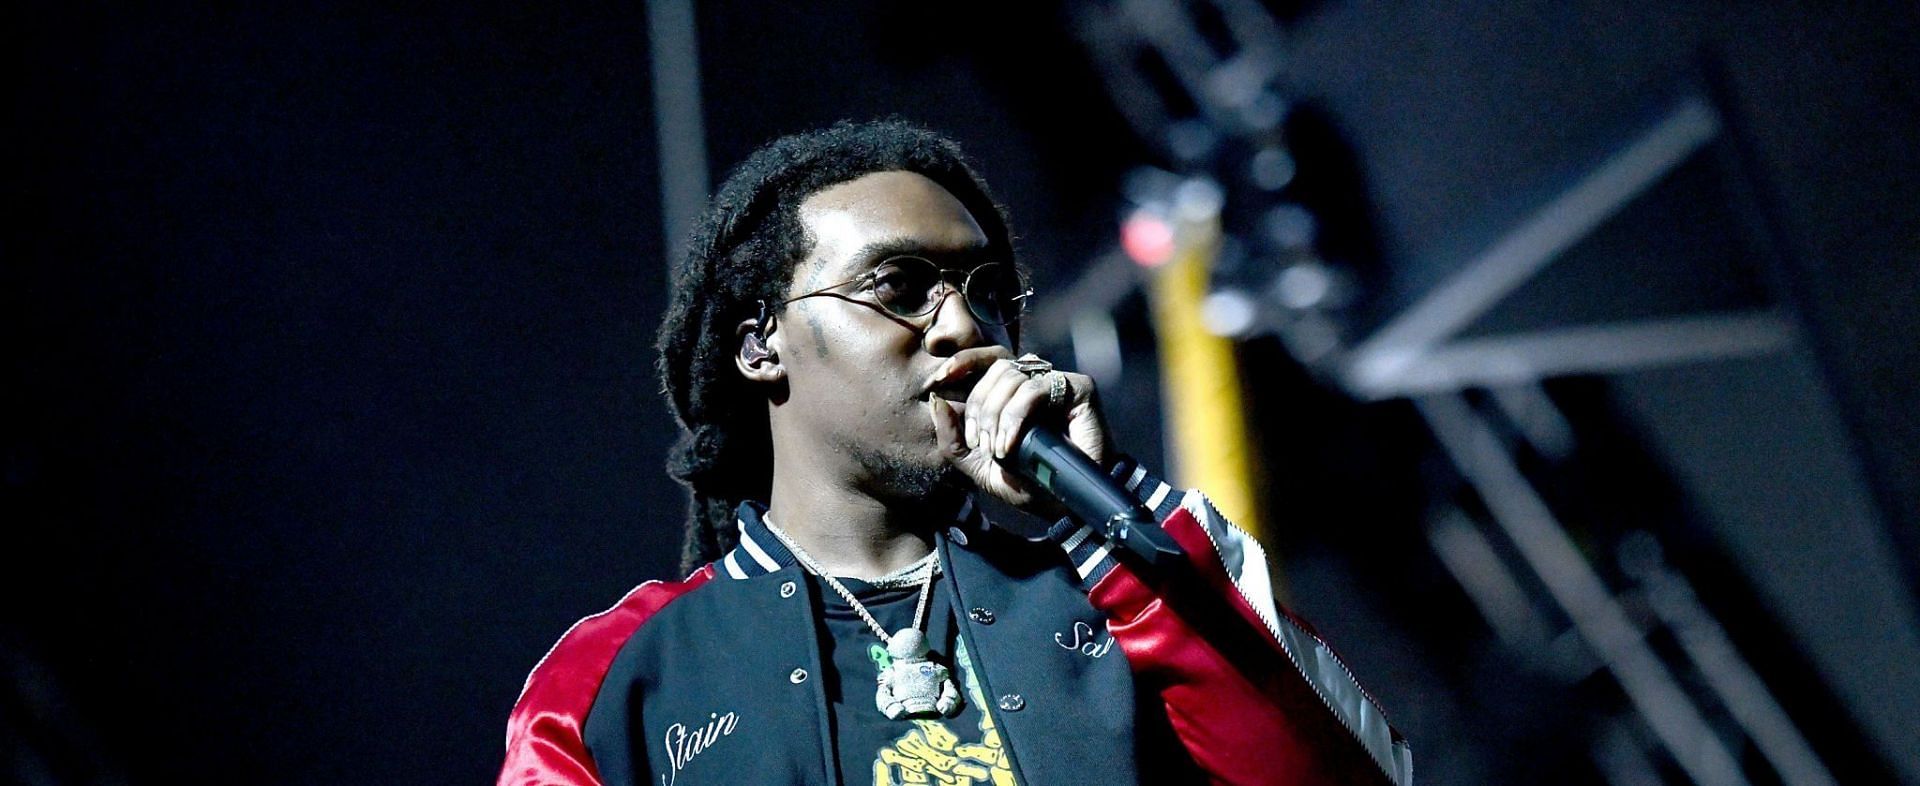 Takeoff was killed in a fatal shooting on November 1 (Image via Getty Images)